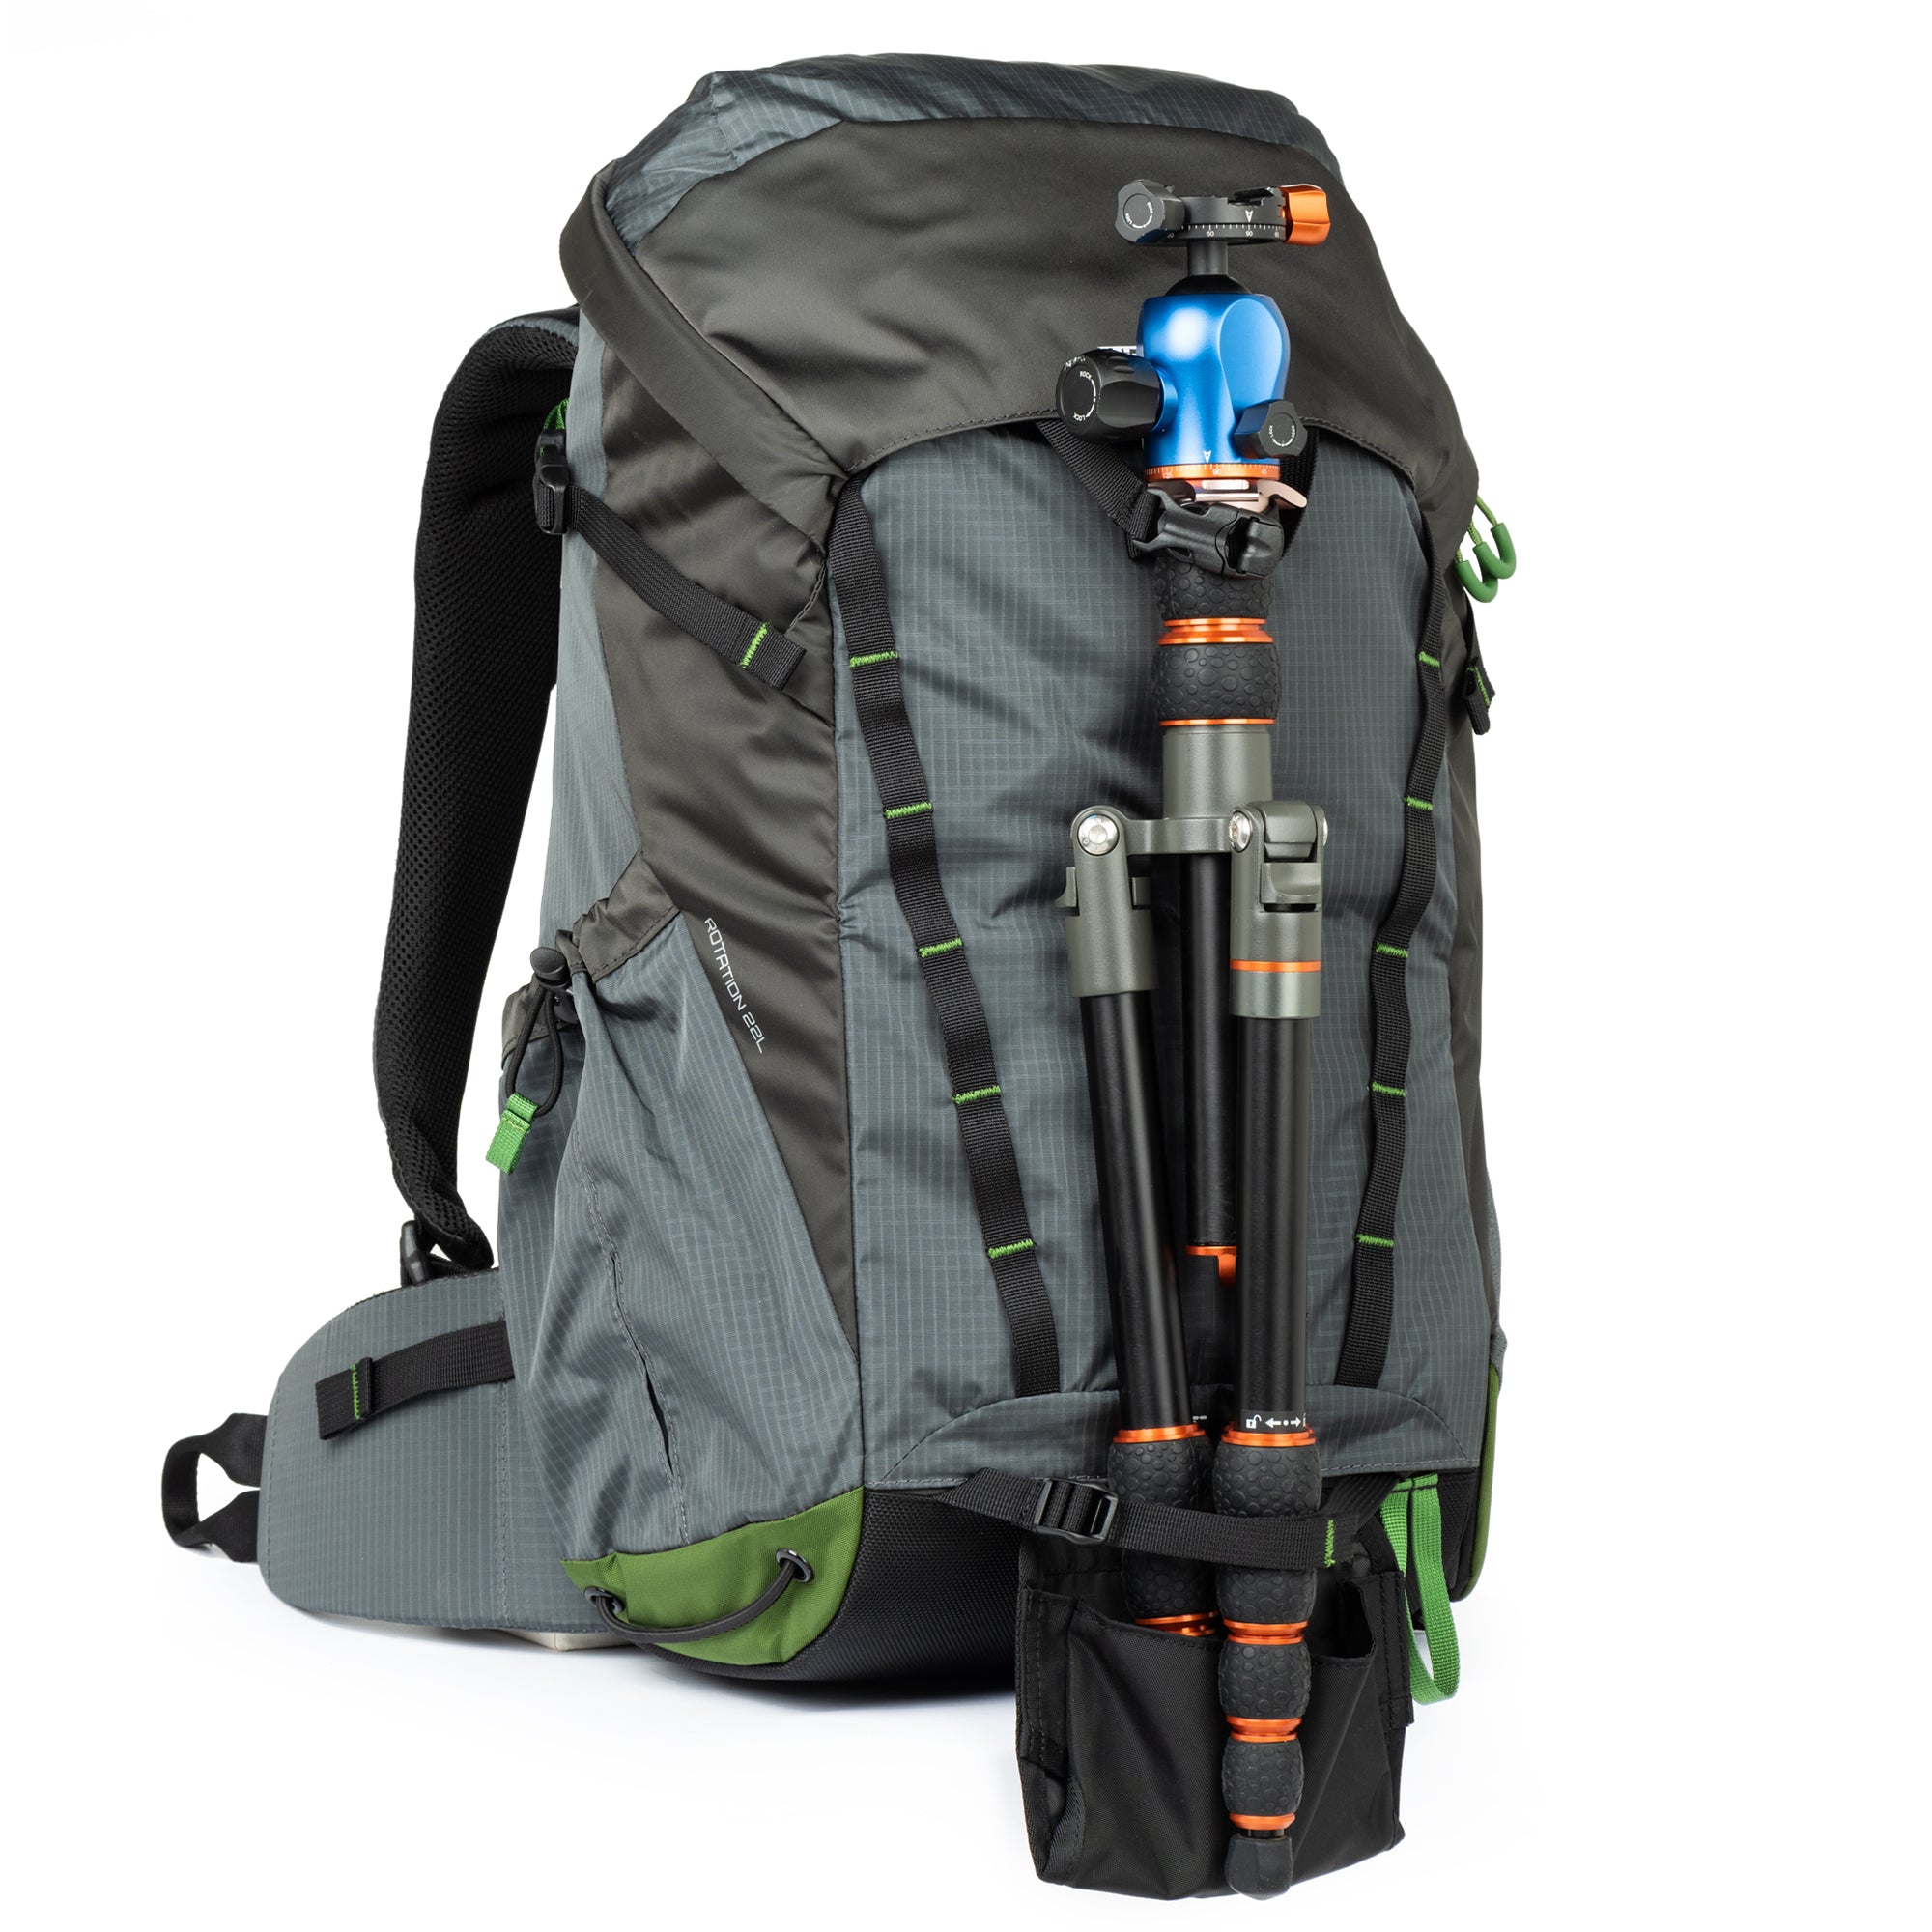 Tripod carries easily on the front and/or side panels